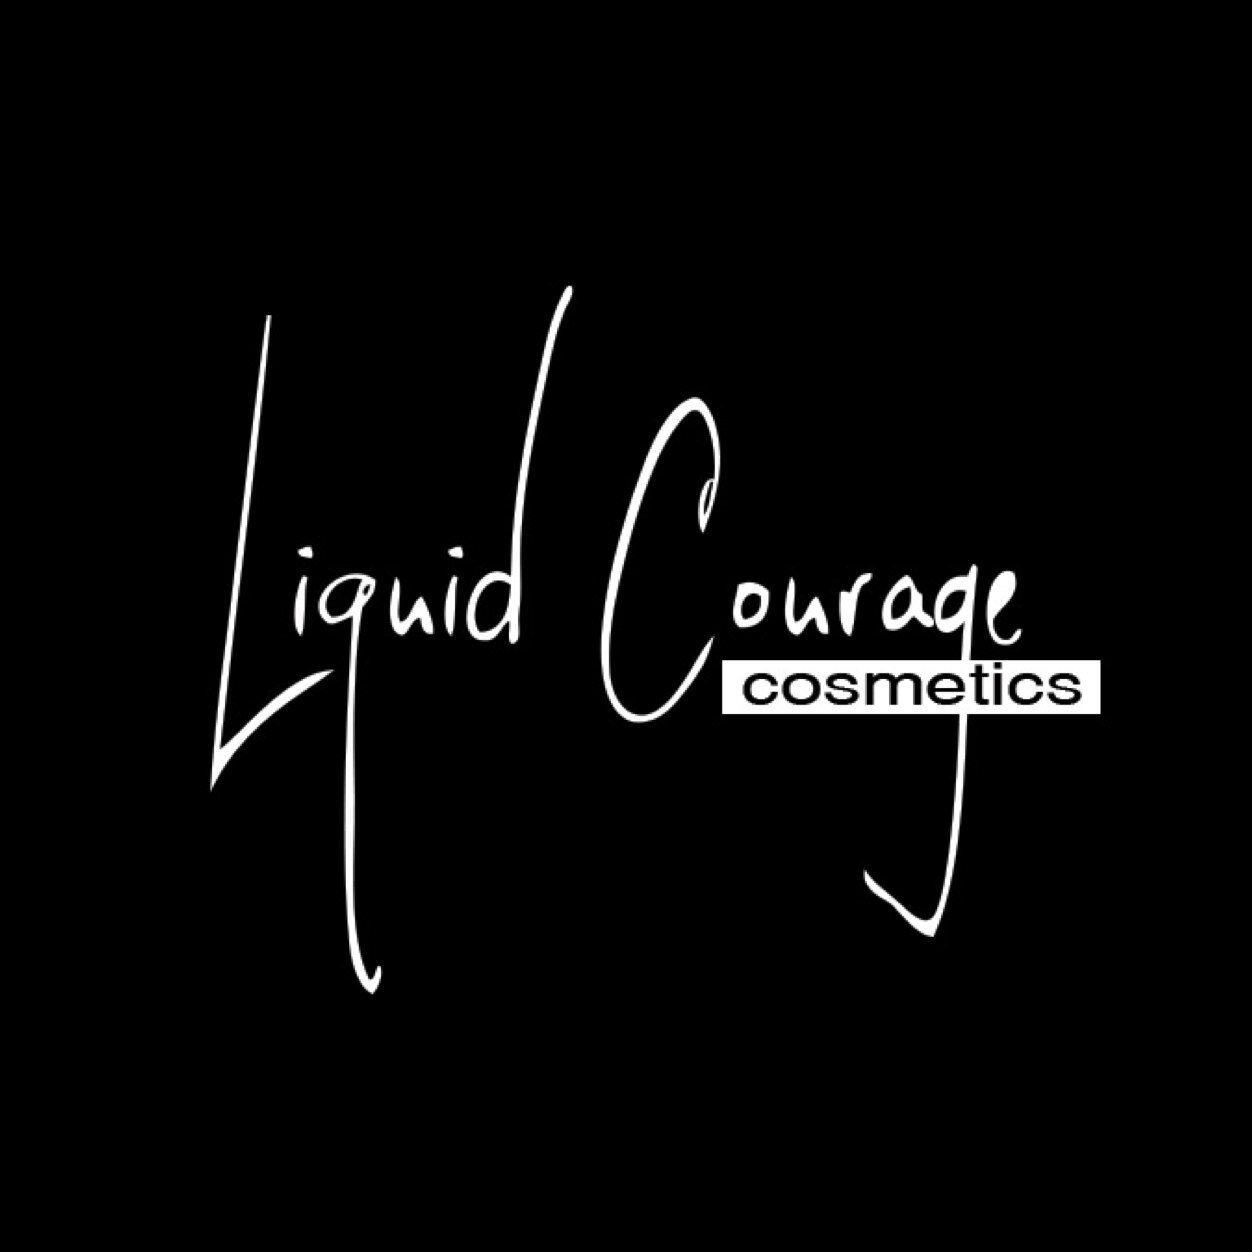 25% Off With Liquid Courage Cosmetics Coupon Code